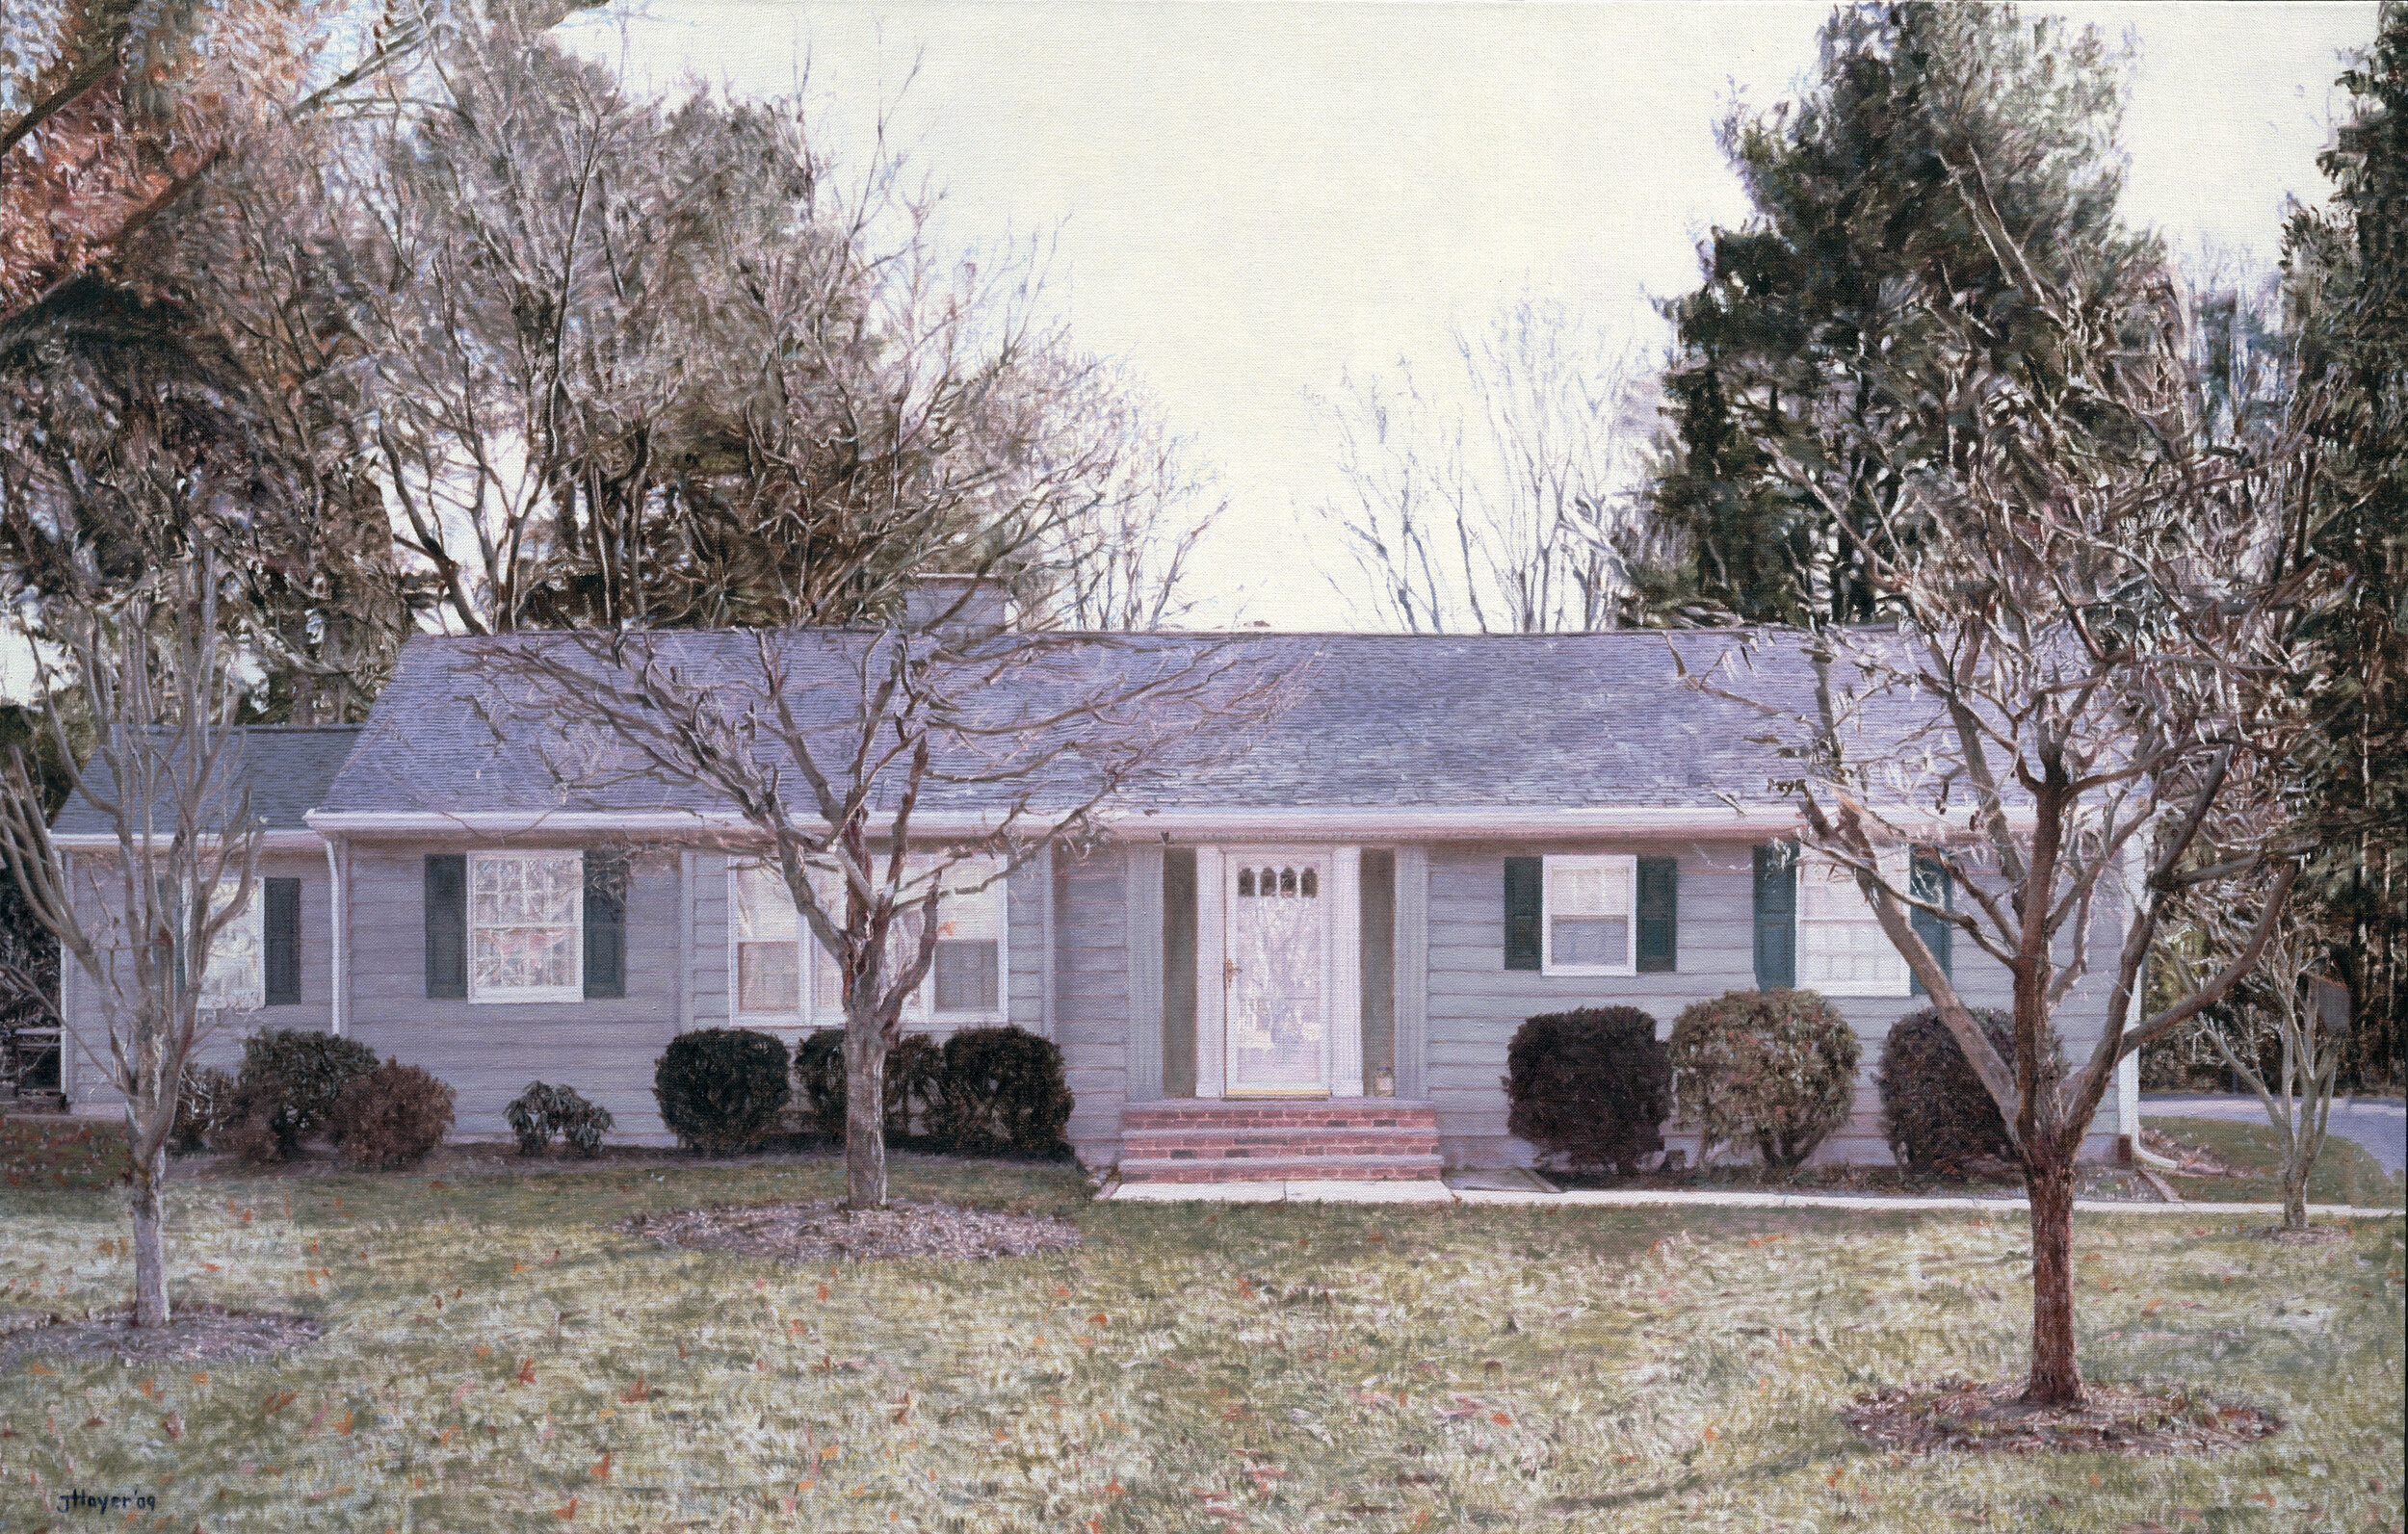  Jack Hoyer  Yardley Ranch House , 2009 Oil on linen 36 x 55 inches 